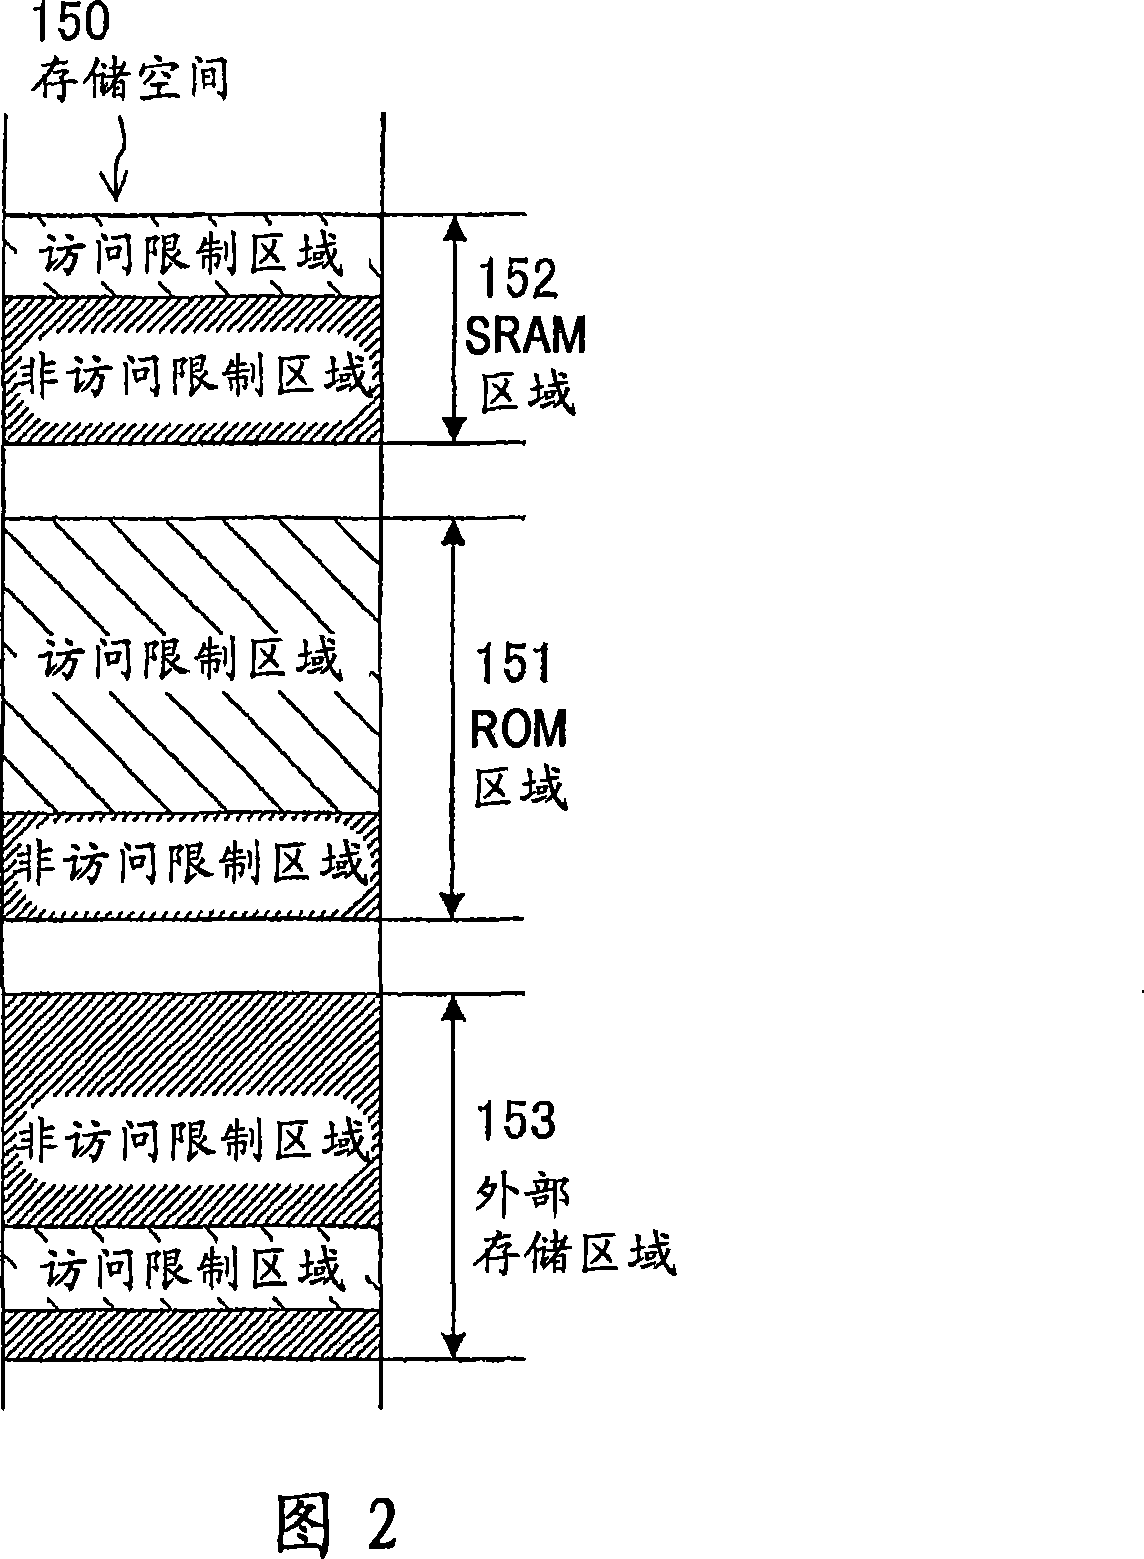 Memory data protecting device and LSI for IC card